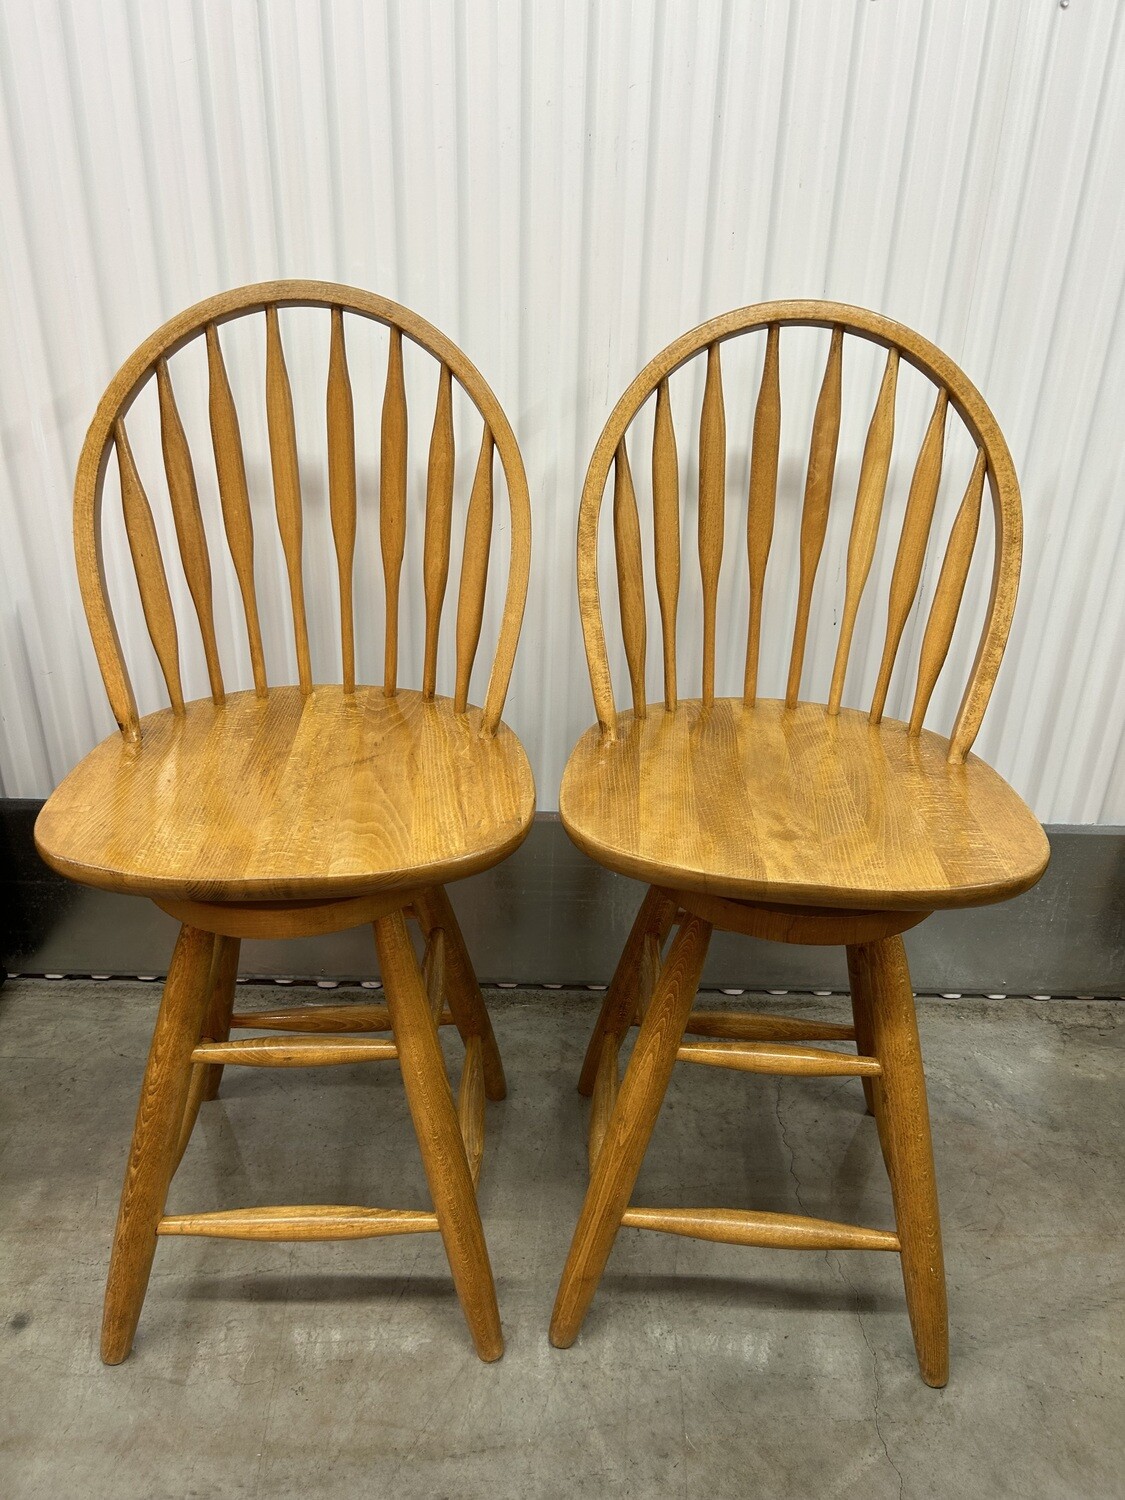 Pair: Bar Stools, oak, swivel seats #2133 ** 4 mos. to sell, 30% off + 30% sale